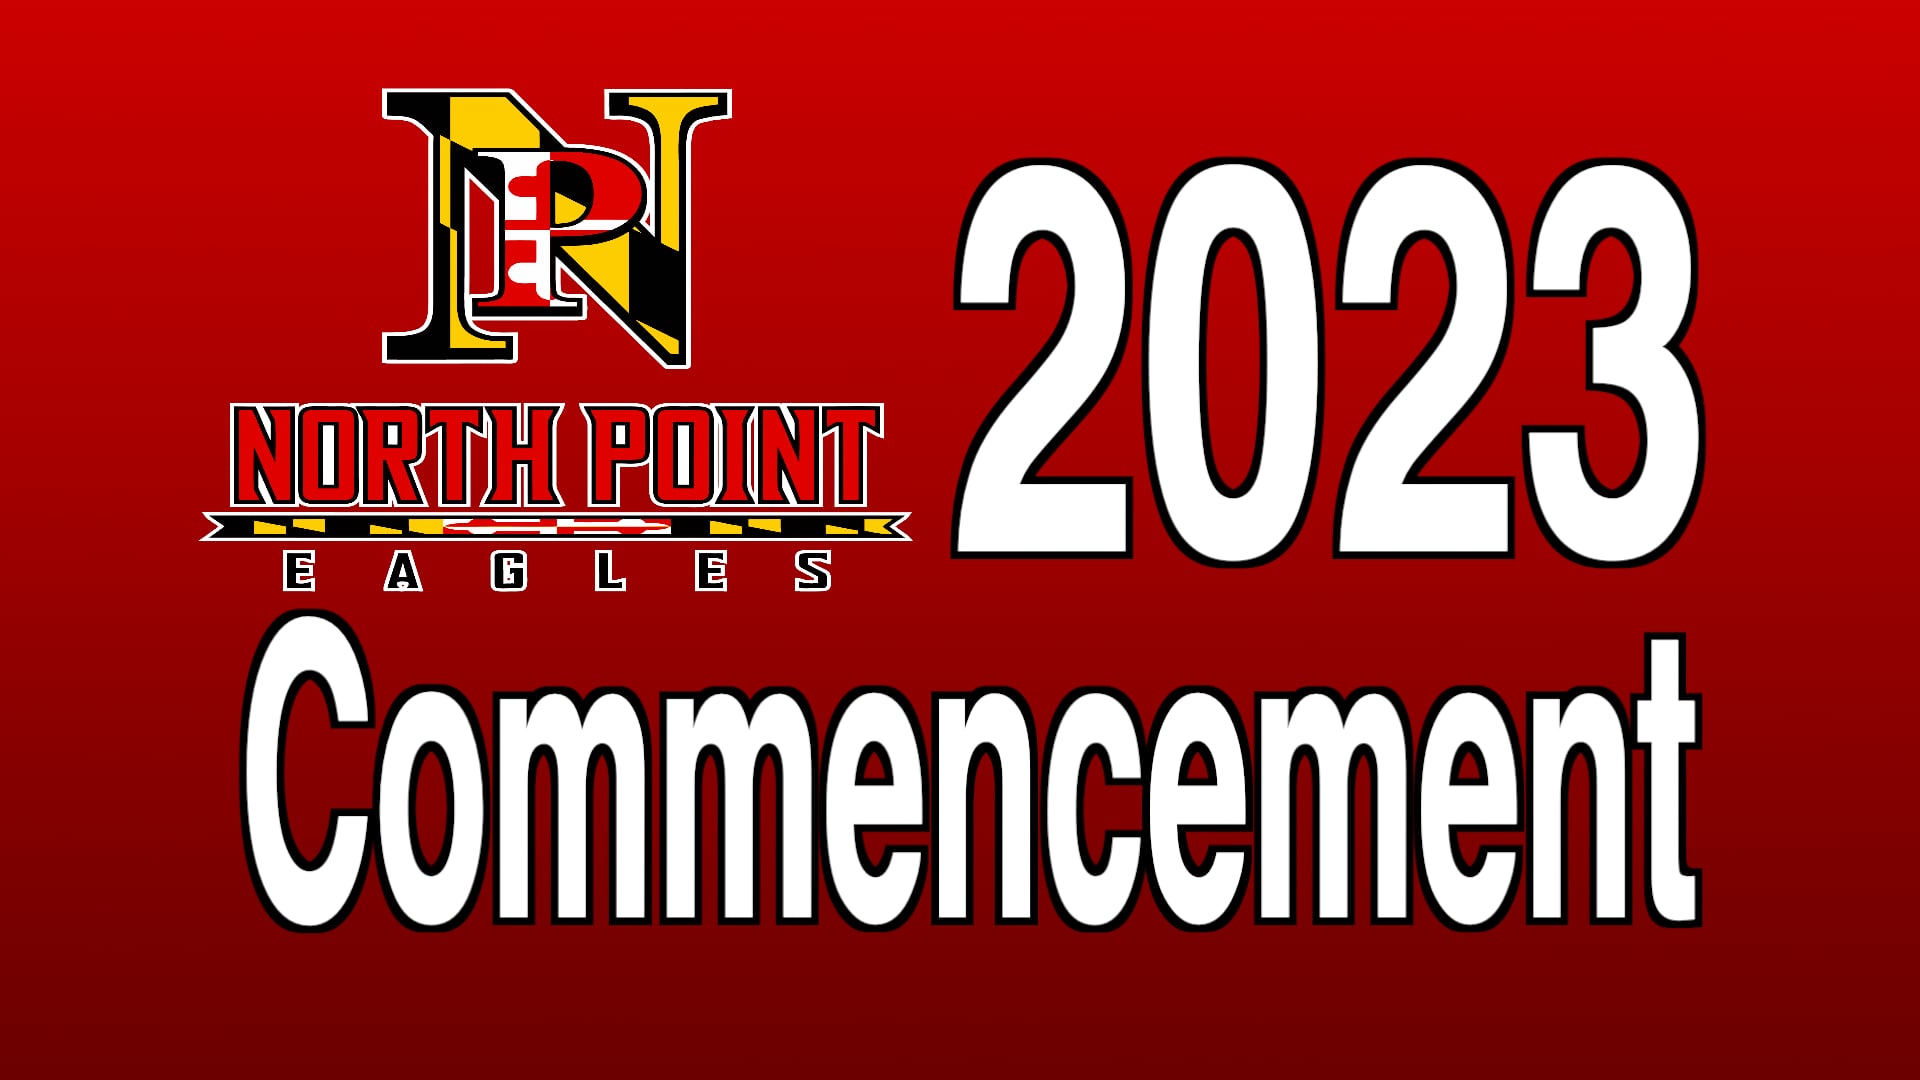 North Point H.S. 2023 Commencement